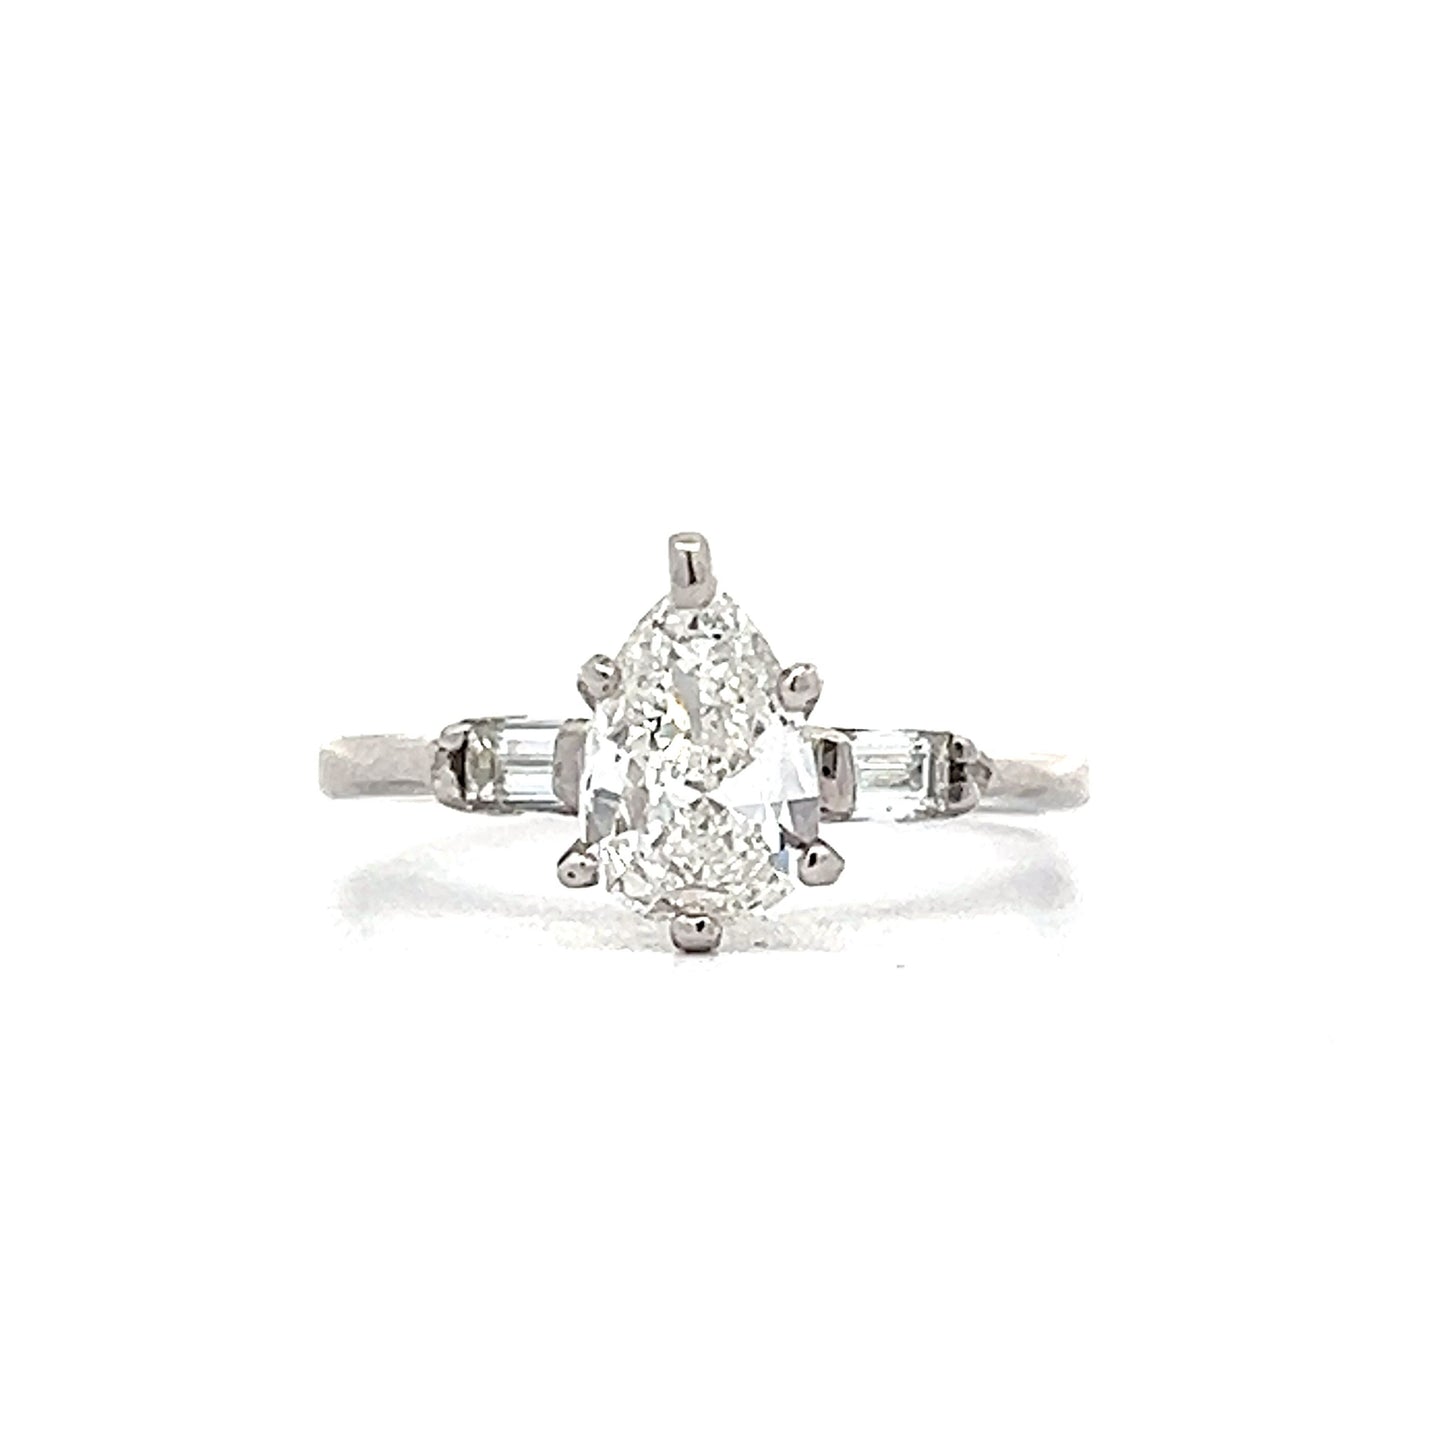 .58 Pear Cut Diamond Engagement Ring in 14k White Gold